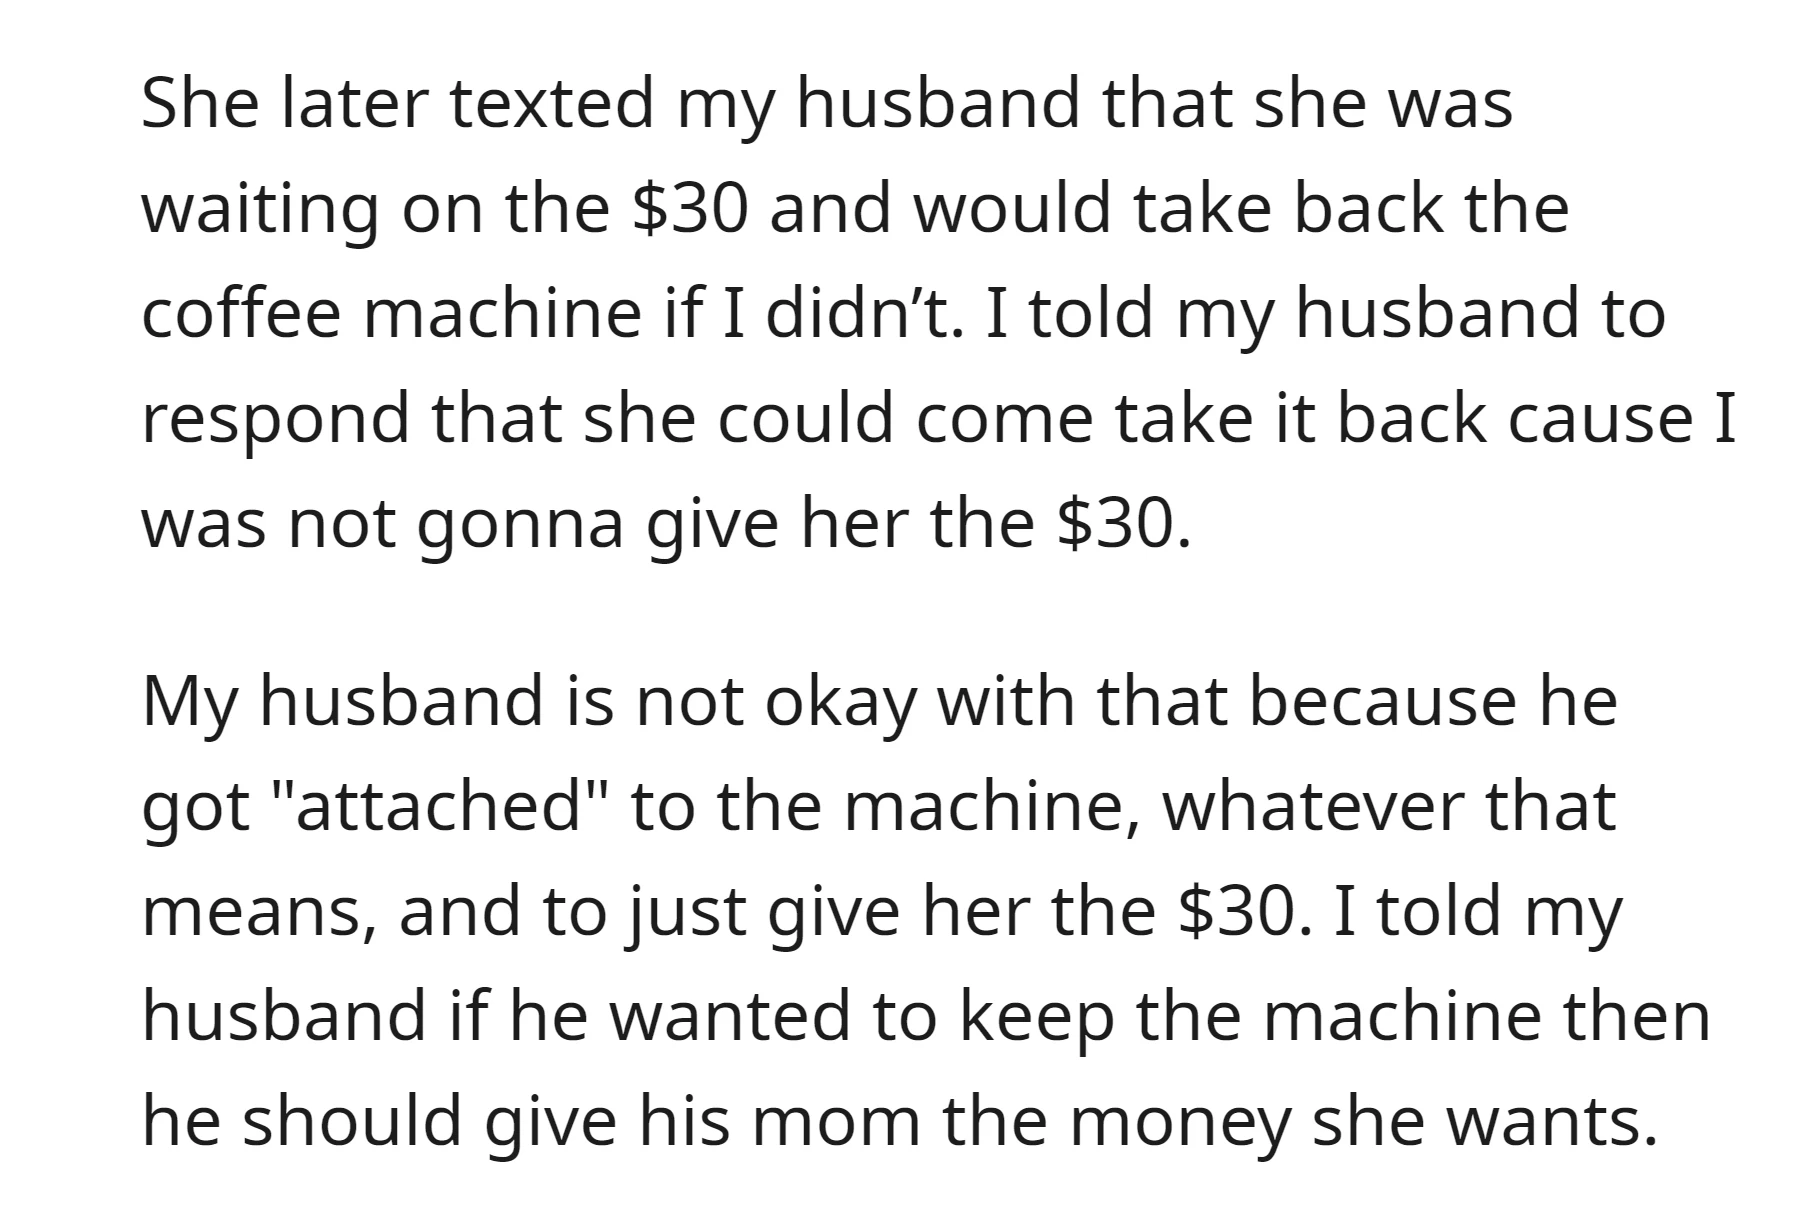 Mother-in-law texted OP's husband asking for the $30